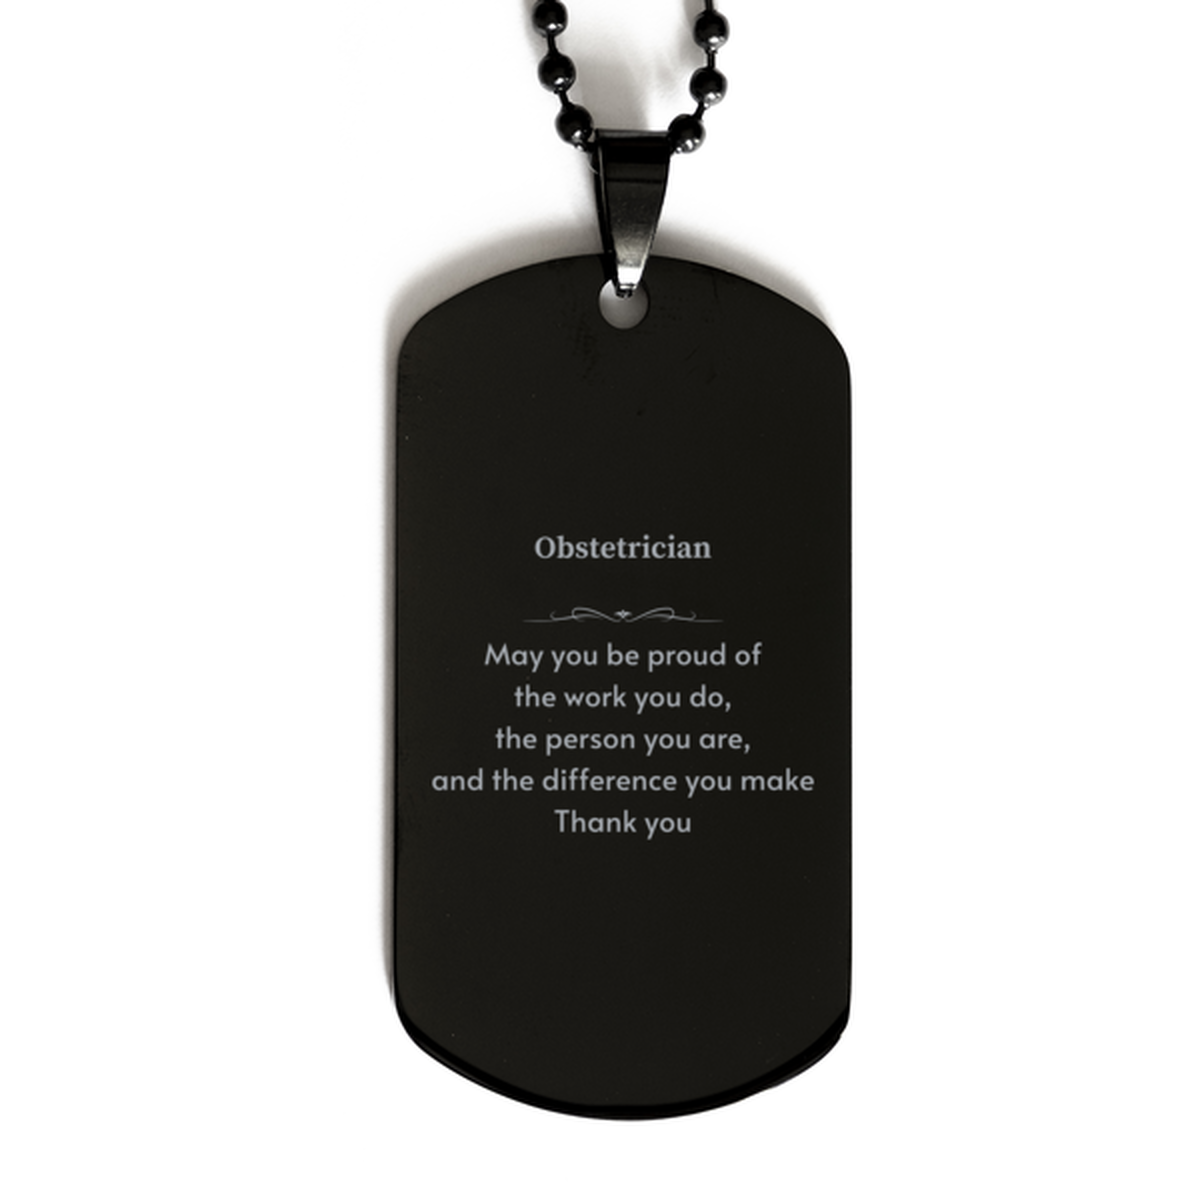 Heartwarming Black Dog Tag Retirement Coworkers Gifts for Obstetrician, Obstetrician May You be proud of the work you do, the person you are Gifts for Boss Men Women Friends